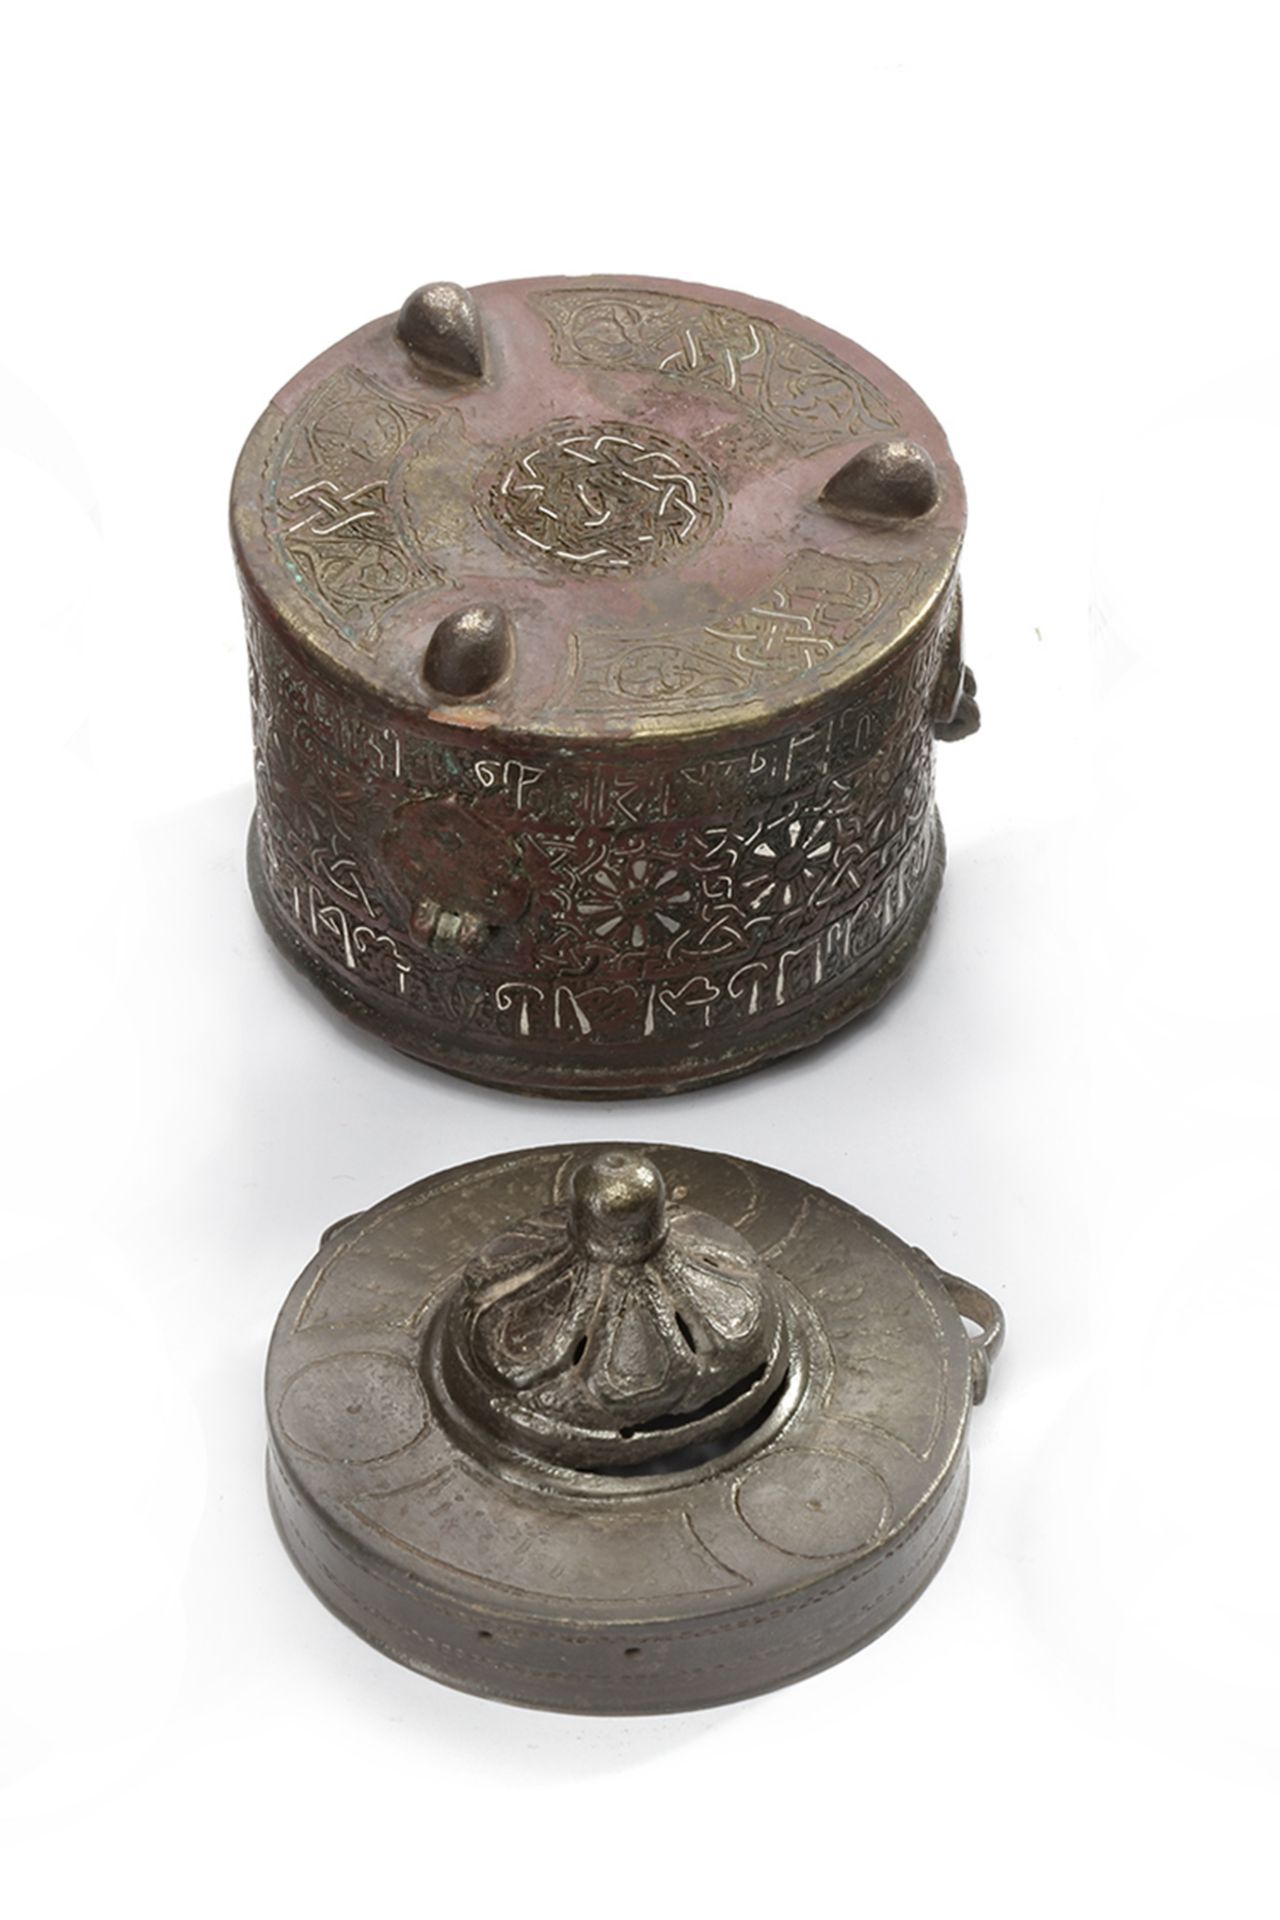 A KHURASAN SILVER- INLAID BRONZE INKWELL, 12TH-13TH CENTURY - Image 3 of 4